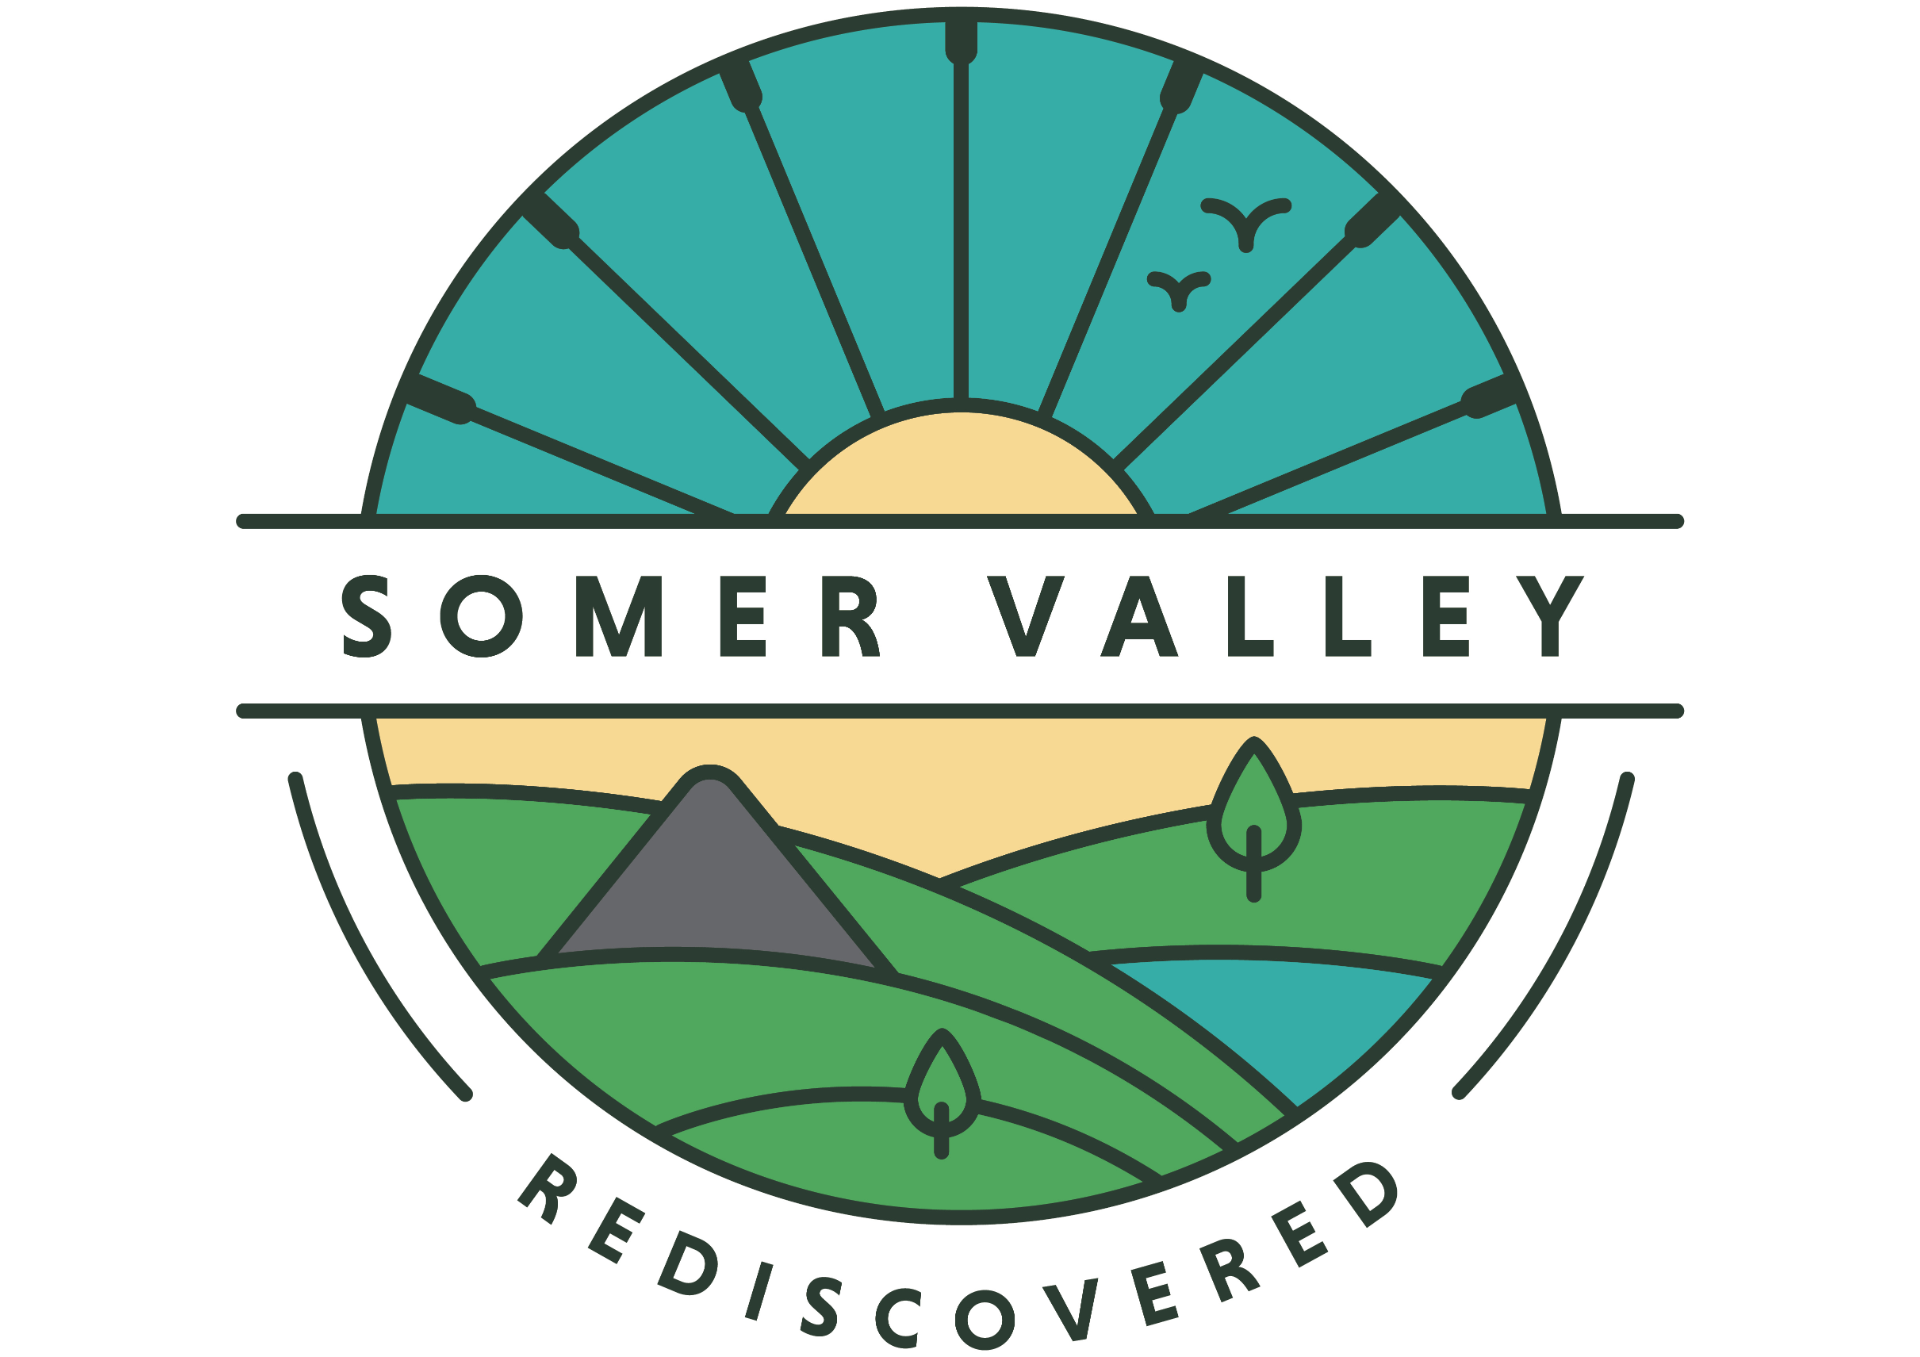 Somer Valley Rediscovered logo which is a circle with blue quadrants to represent the sky, green hills and a lake